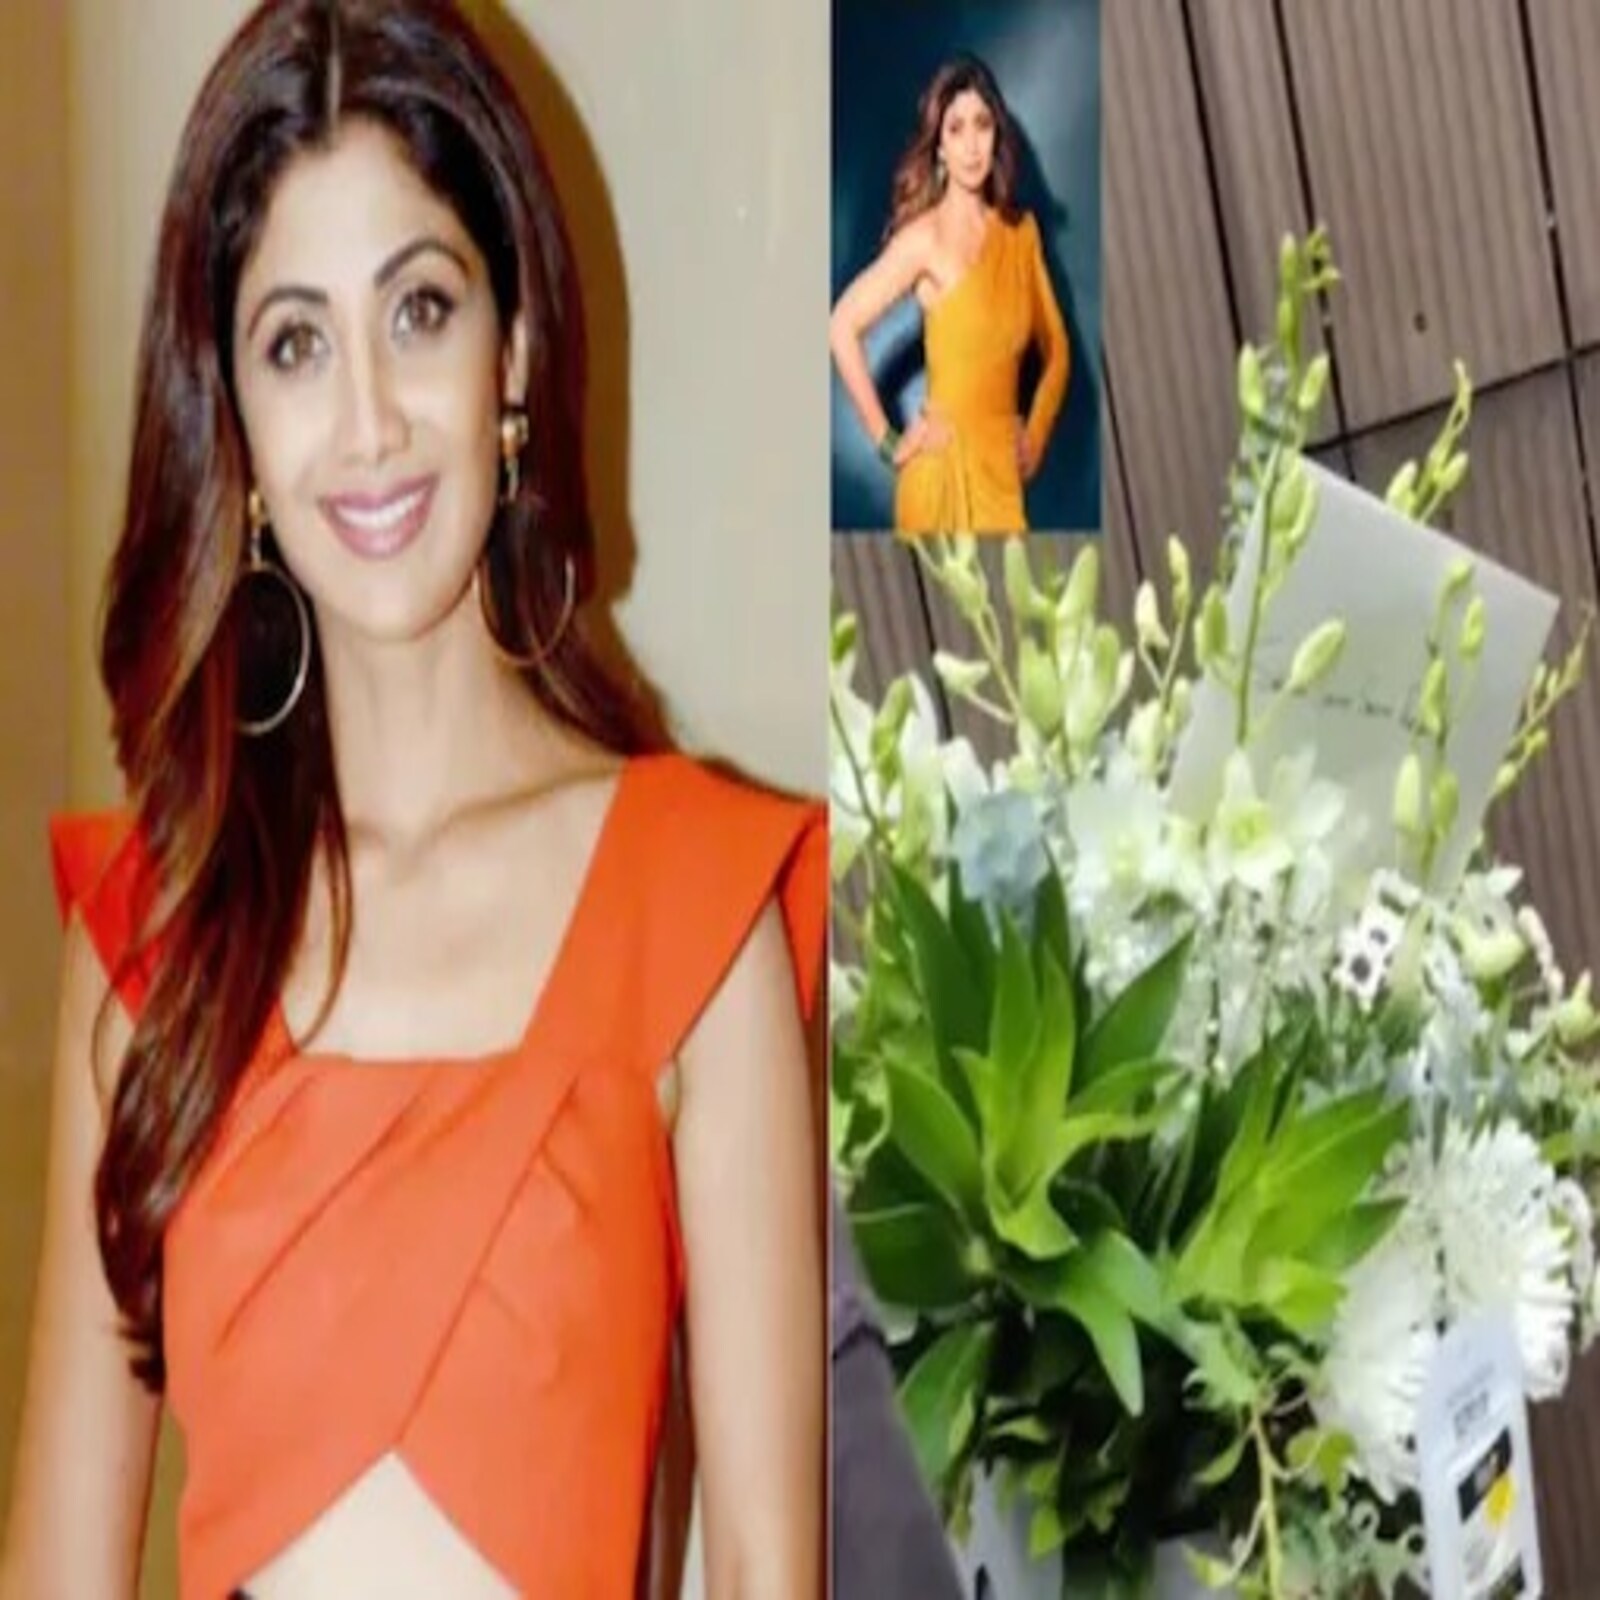 Pornography Case: Fans Support Shilpa Shetty by Sending Bouquets